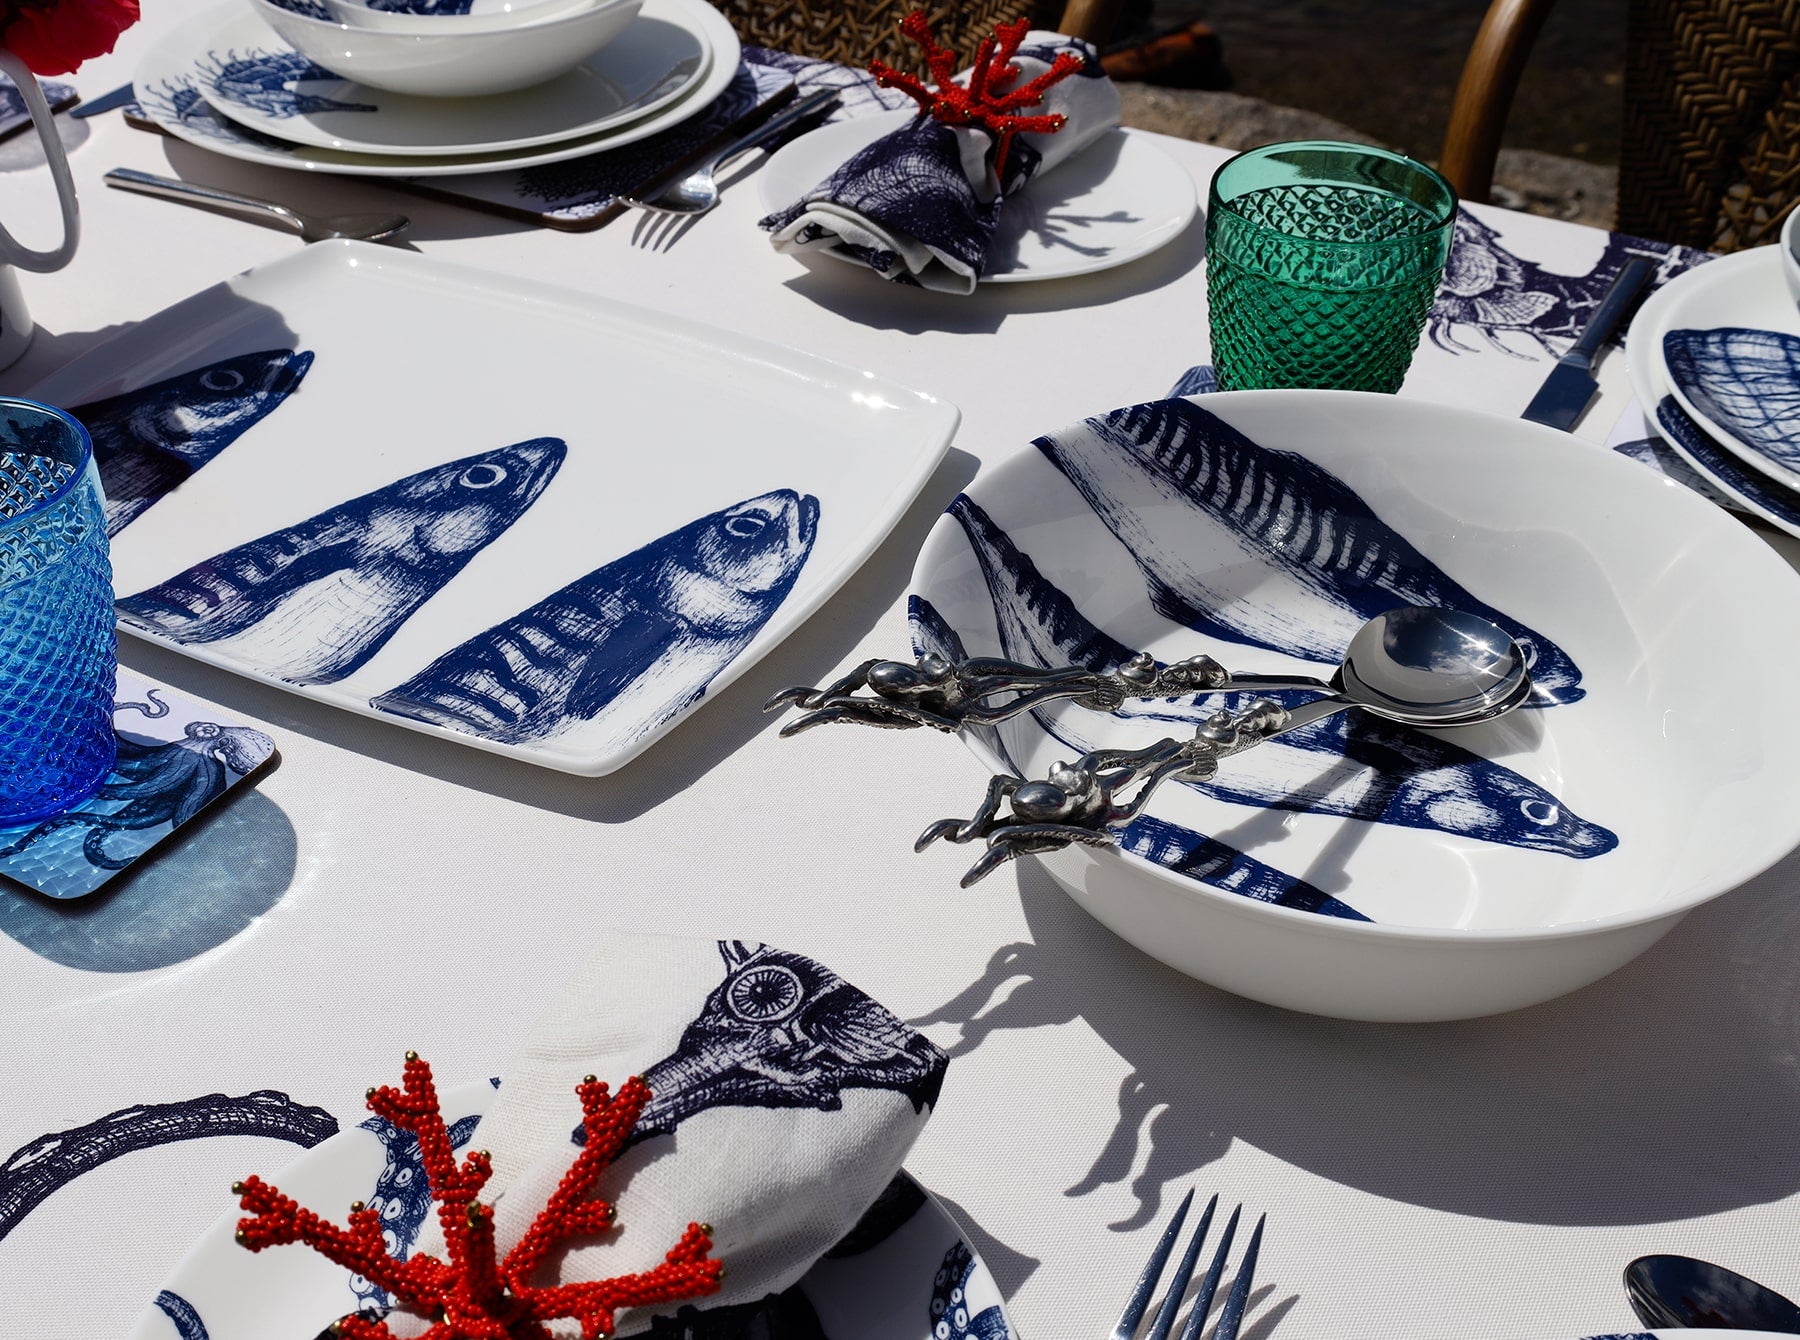 Platter in Bone China in our Classic range in Navy and white in the Mackerel design on a white tablecloth .In the background are other place settings in our classic designs and a Mackerel serving bowl with serving spoons